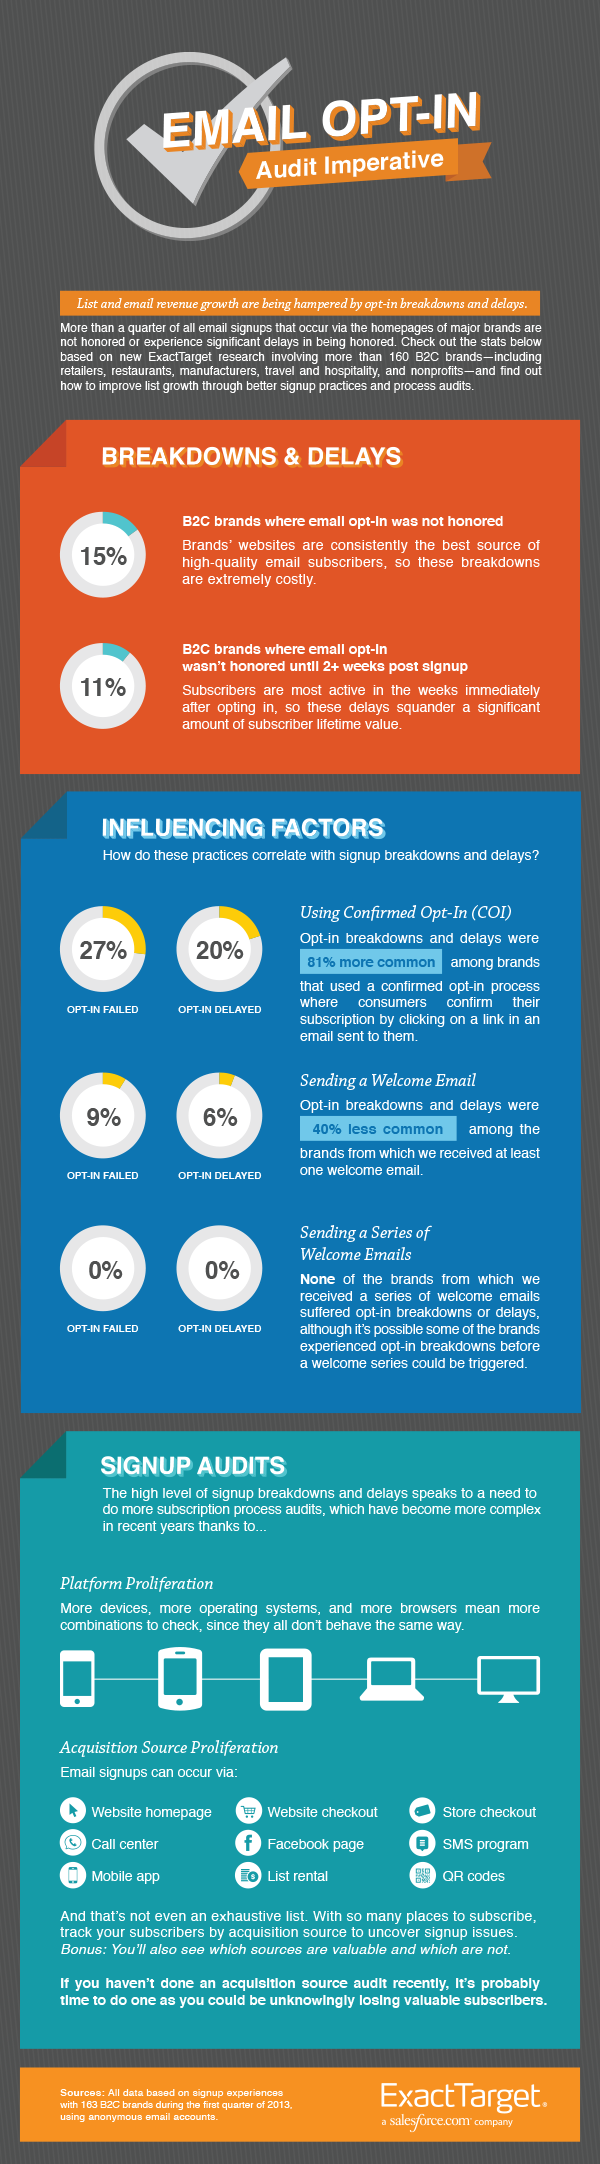 Email Opt-In Audit Imperative Infographic